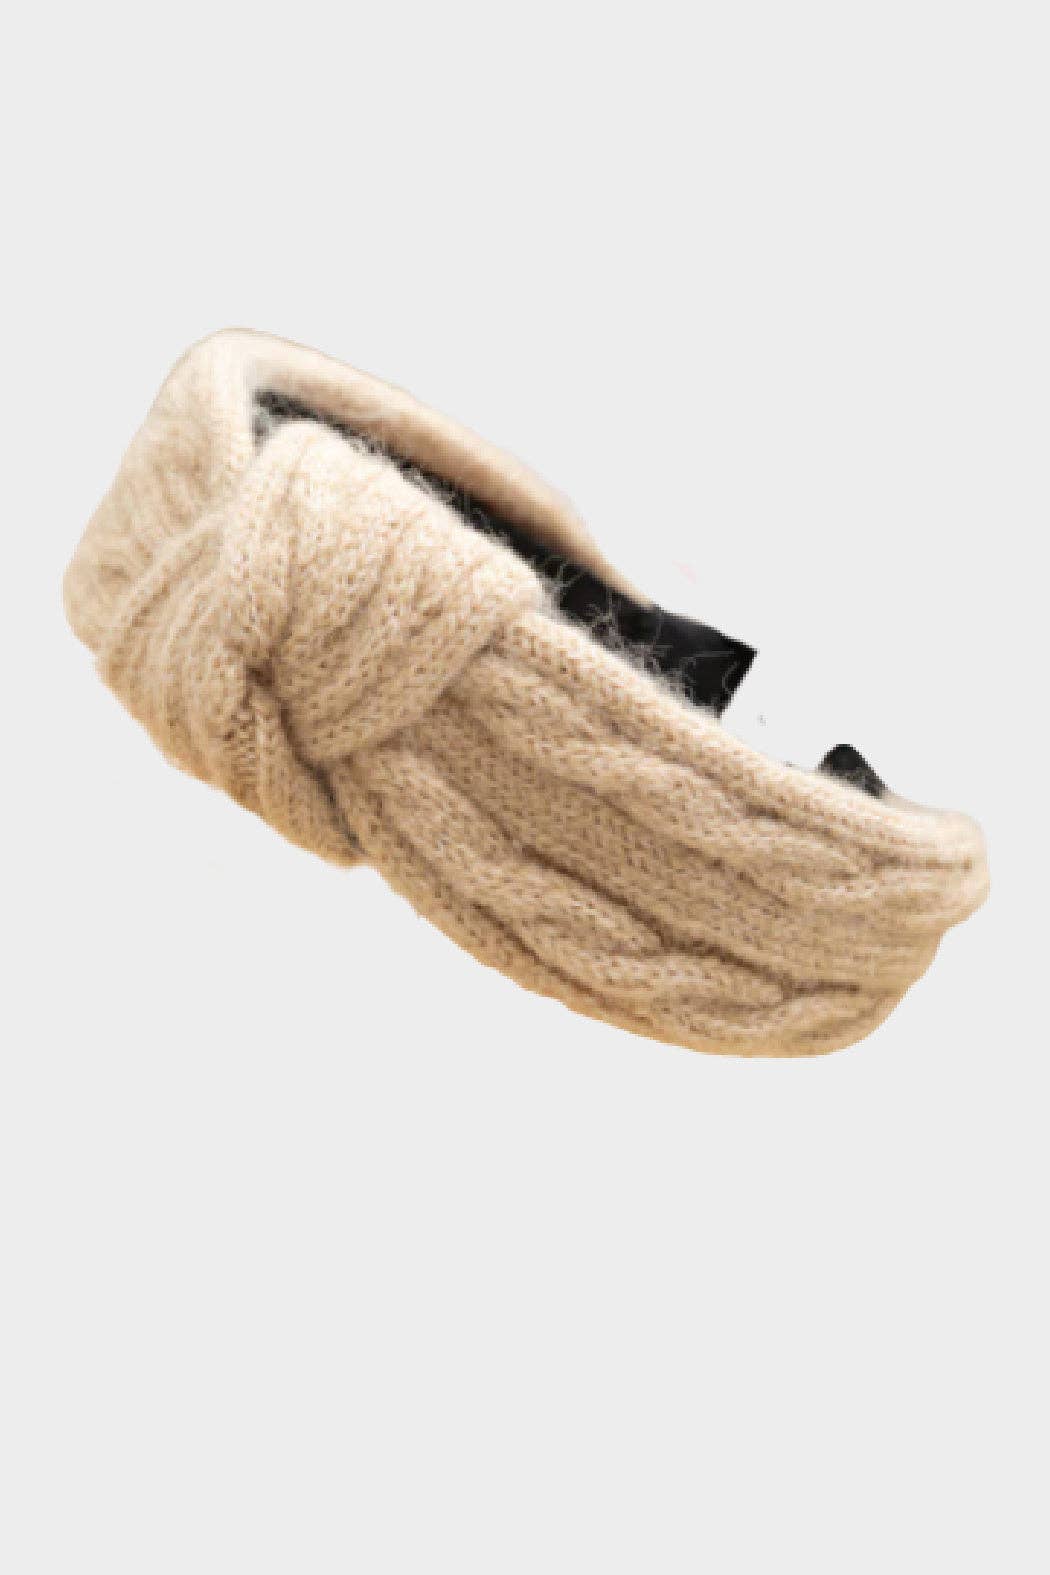 Cable Knit Headband - available in 5 colors: Beige